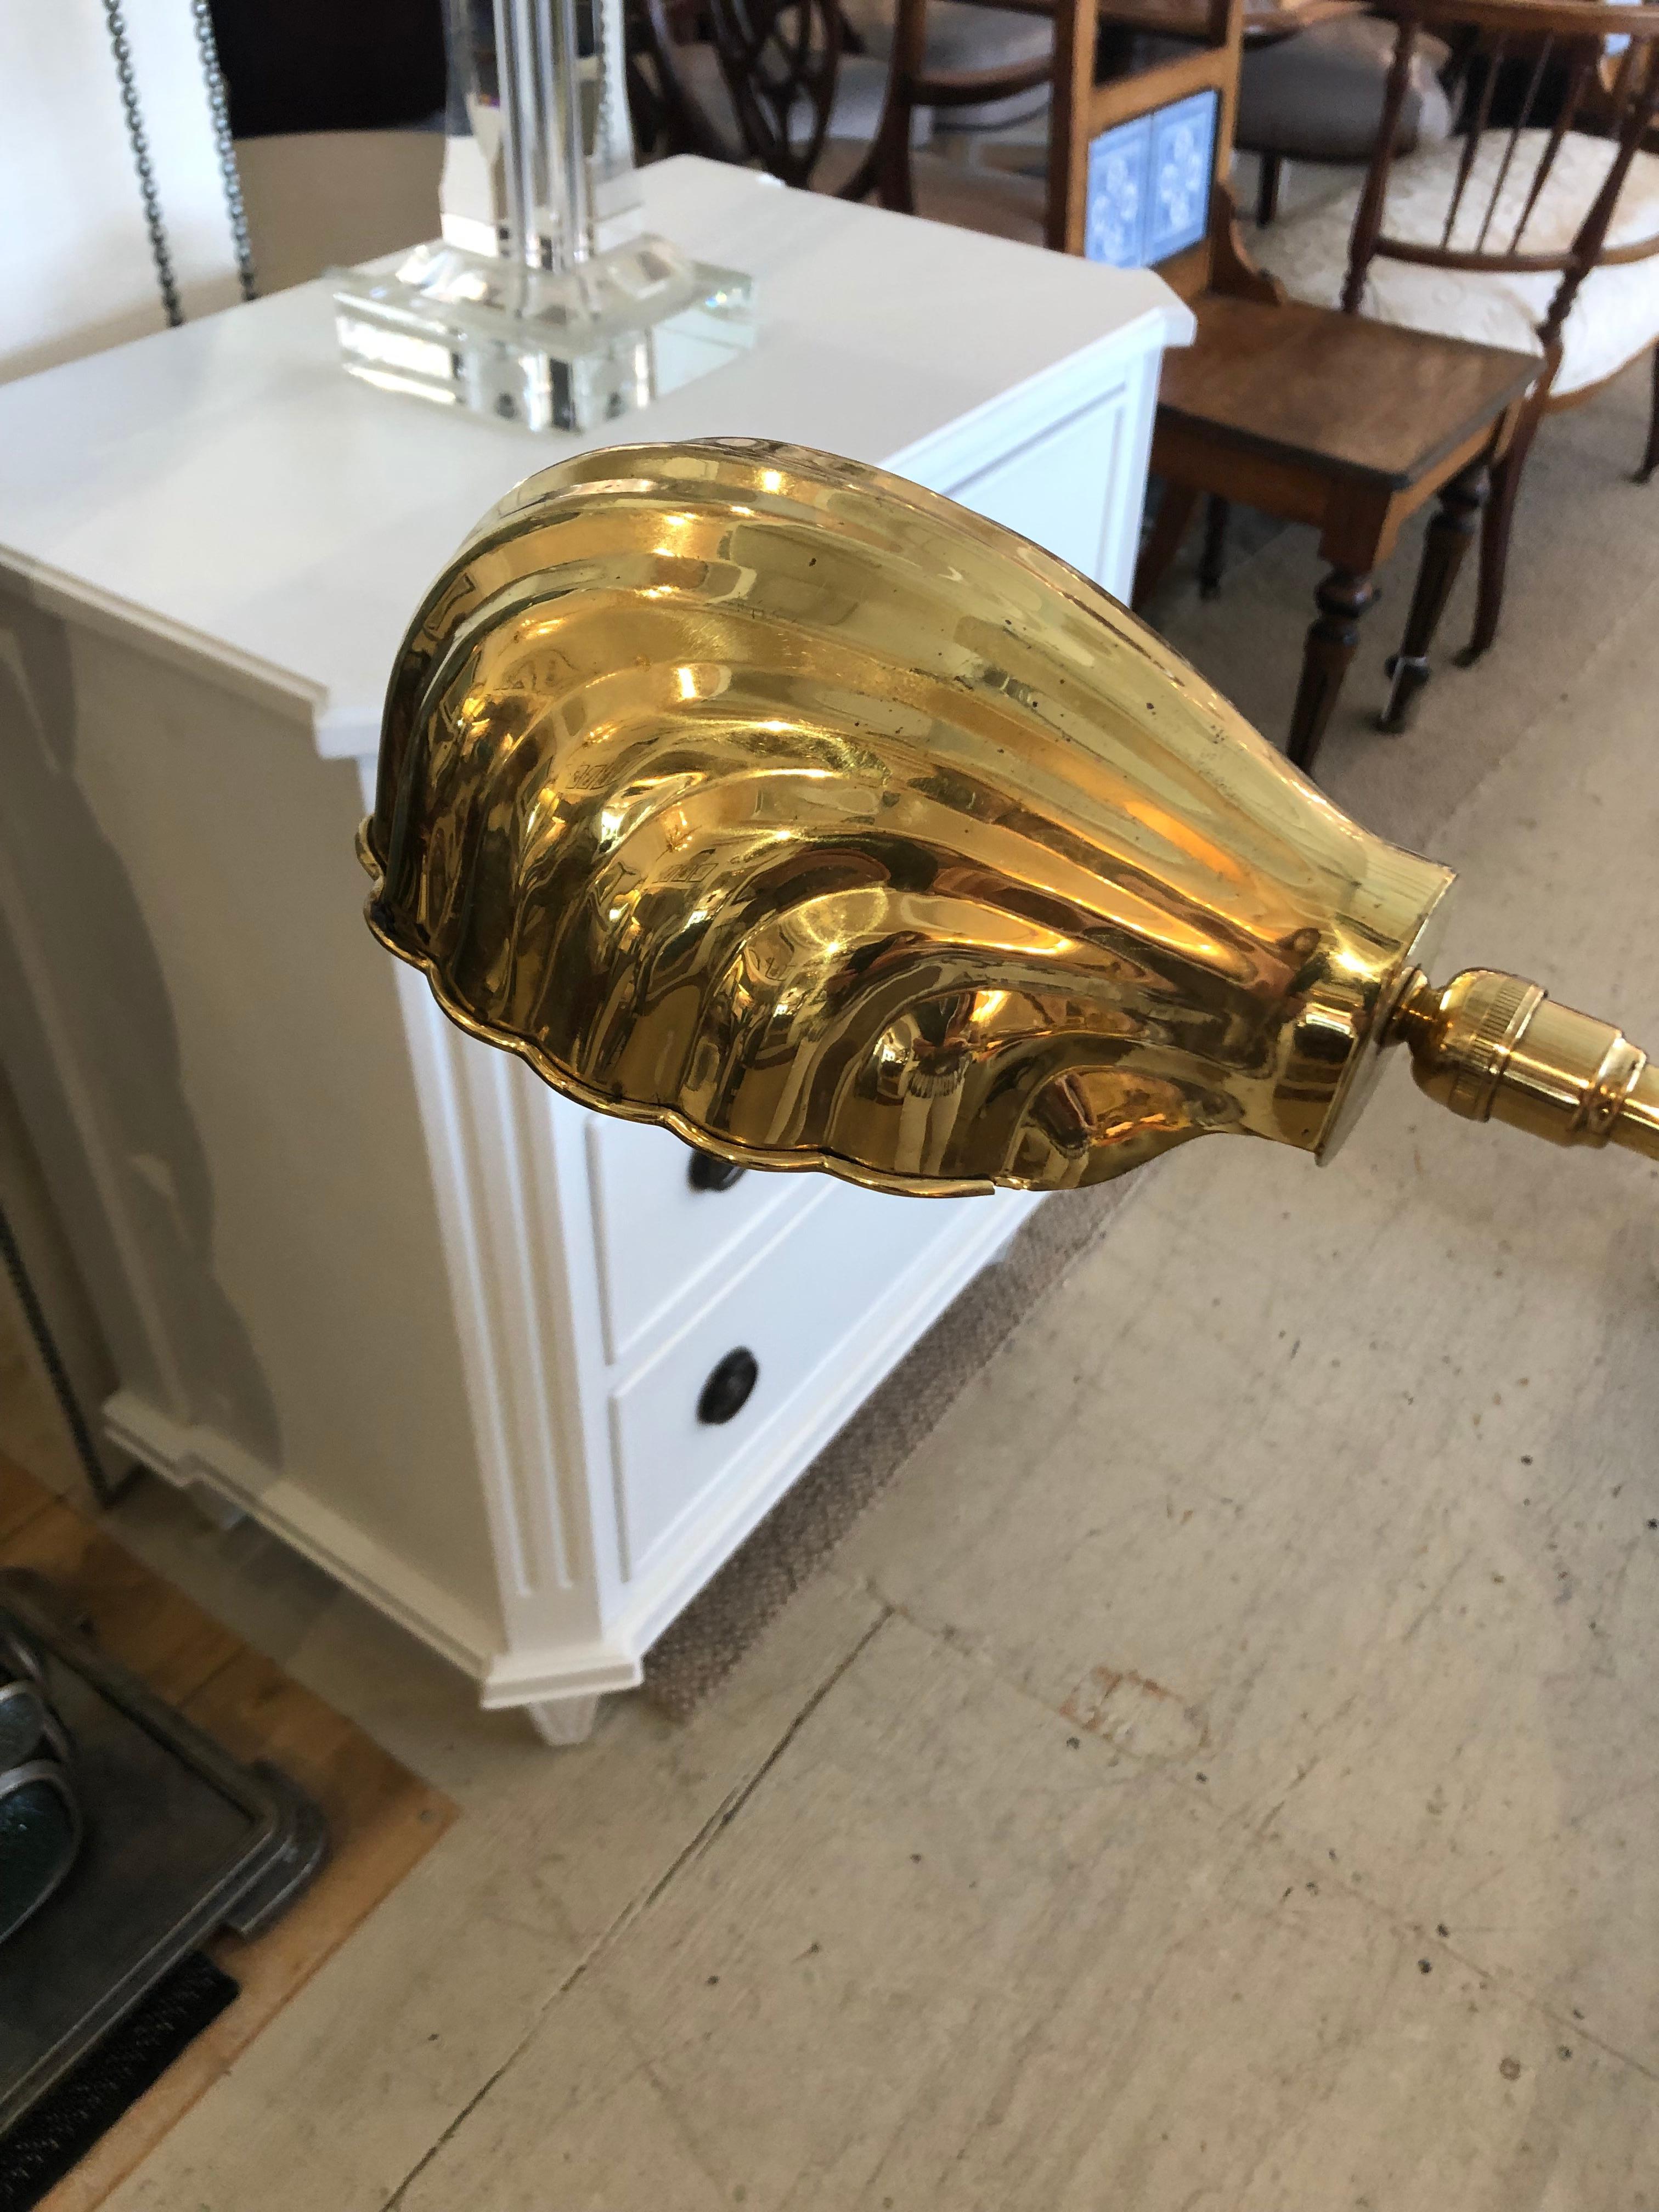 A lovely vintage floor lamp by Chapman having brass shell shaped shade and adjustable stem. Shows some wear and could use some WD-40 on the stem. Still beautiful and priced accordingly.
At highest around 55